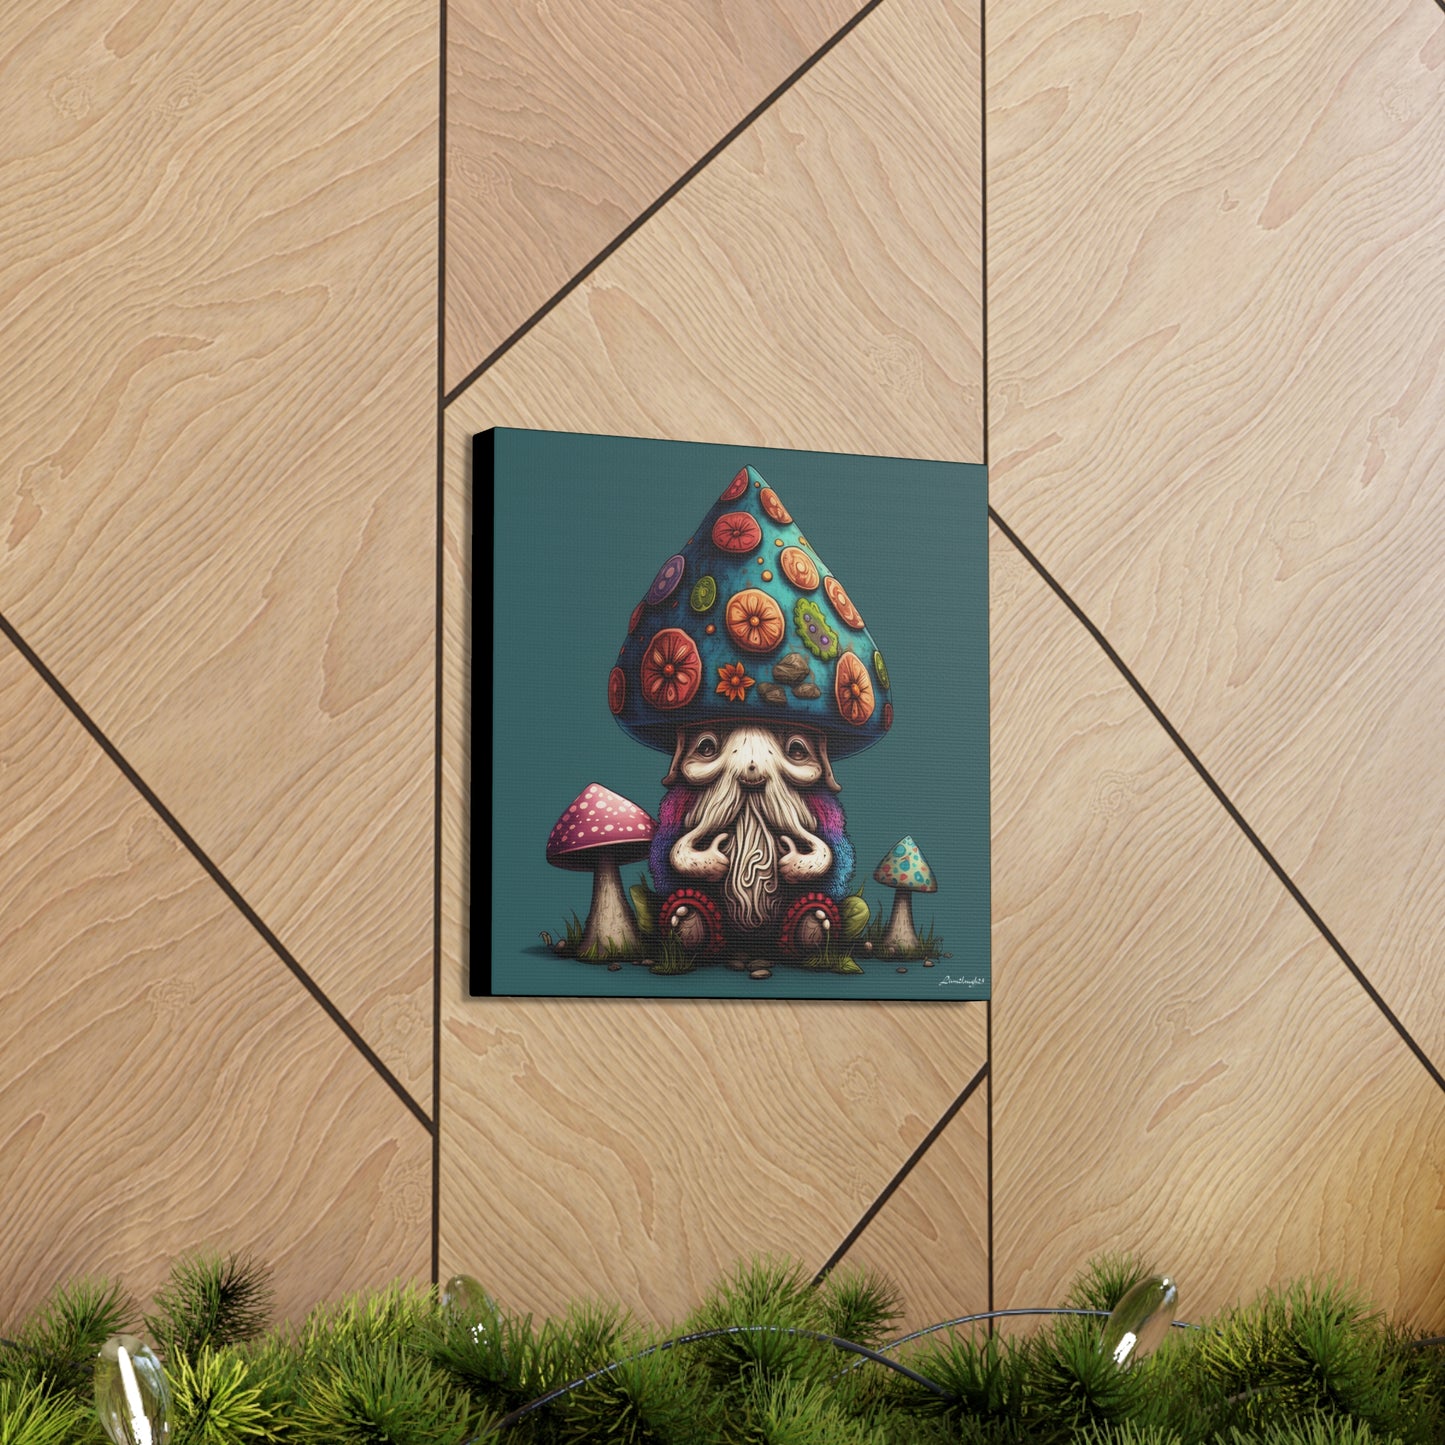 Gothic Bearded Gnome With Beautifully Detailed Polka Dot Orange Green Mushroom Hat Canvas Gallery Wraps